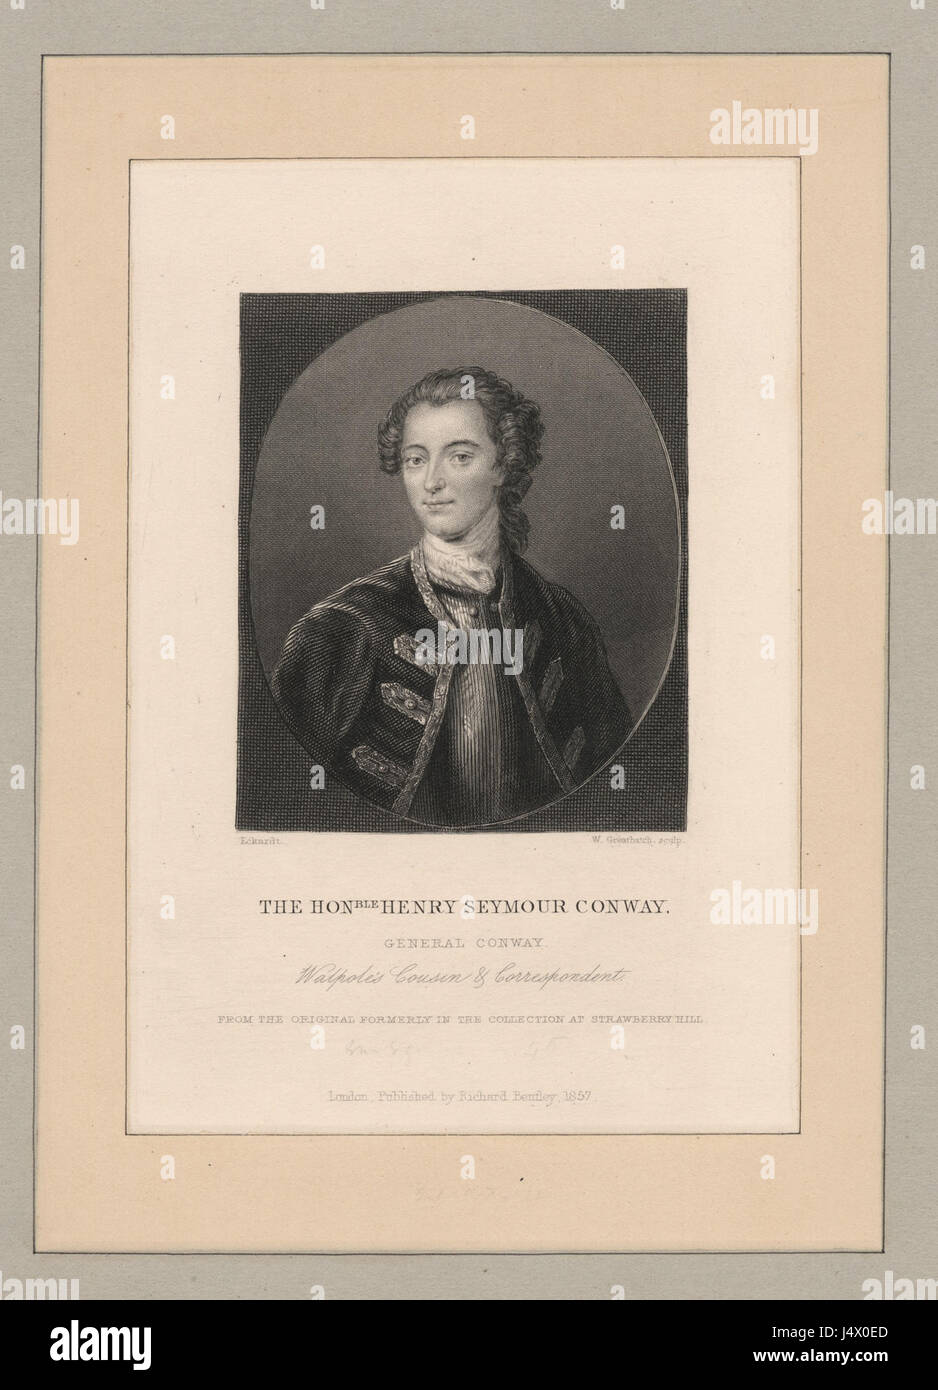 The Honble. Henry Seymour Conway (NYPL NYPG94 F43 419849) Stock Photo